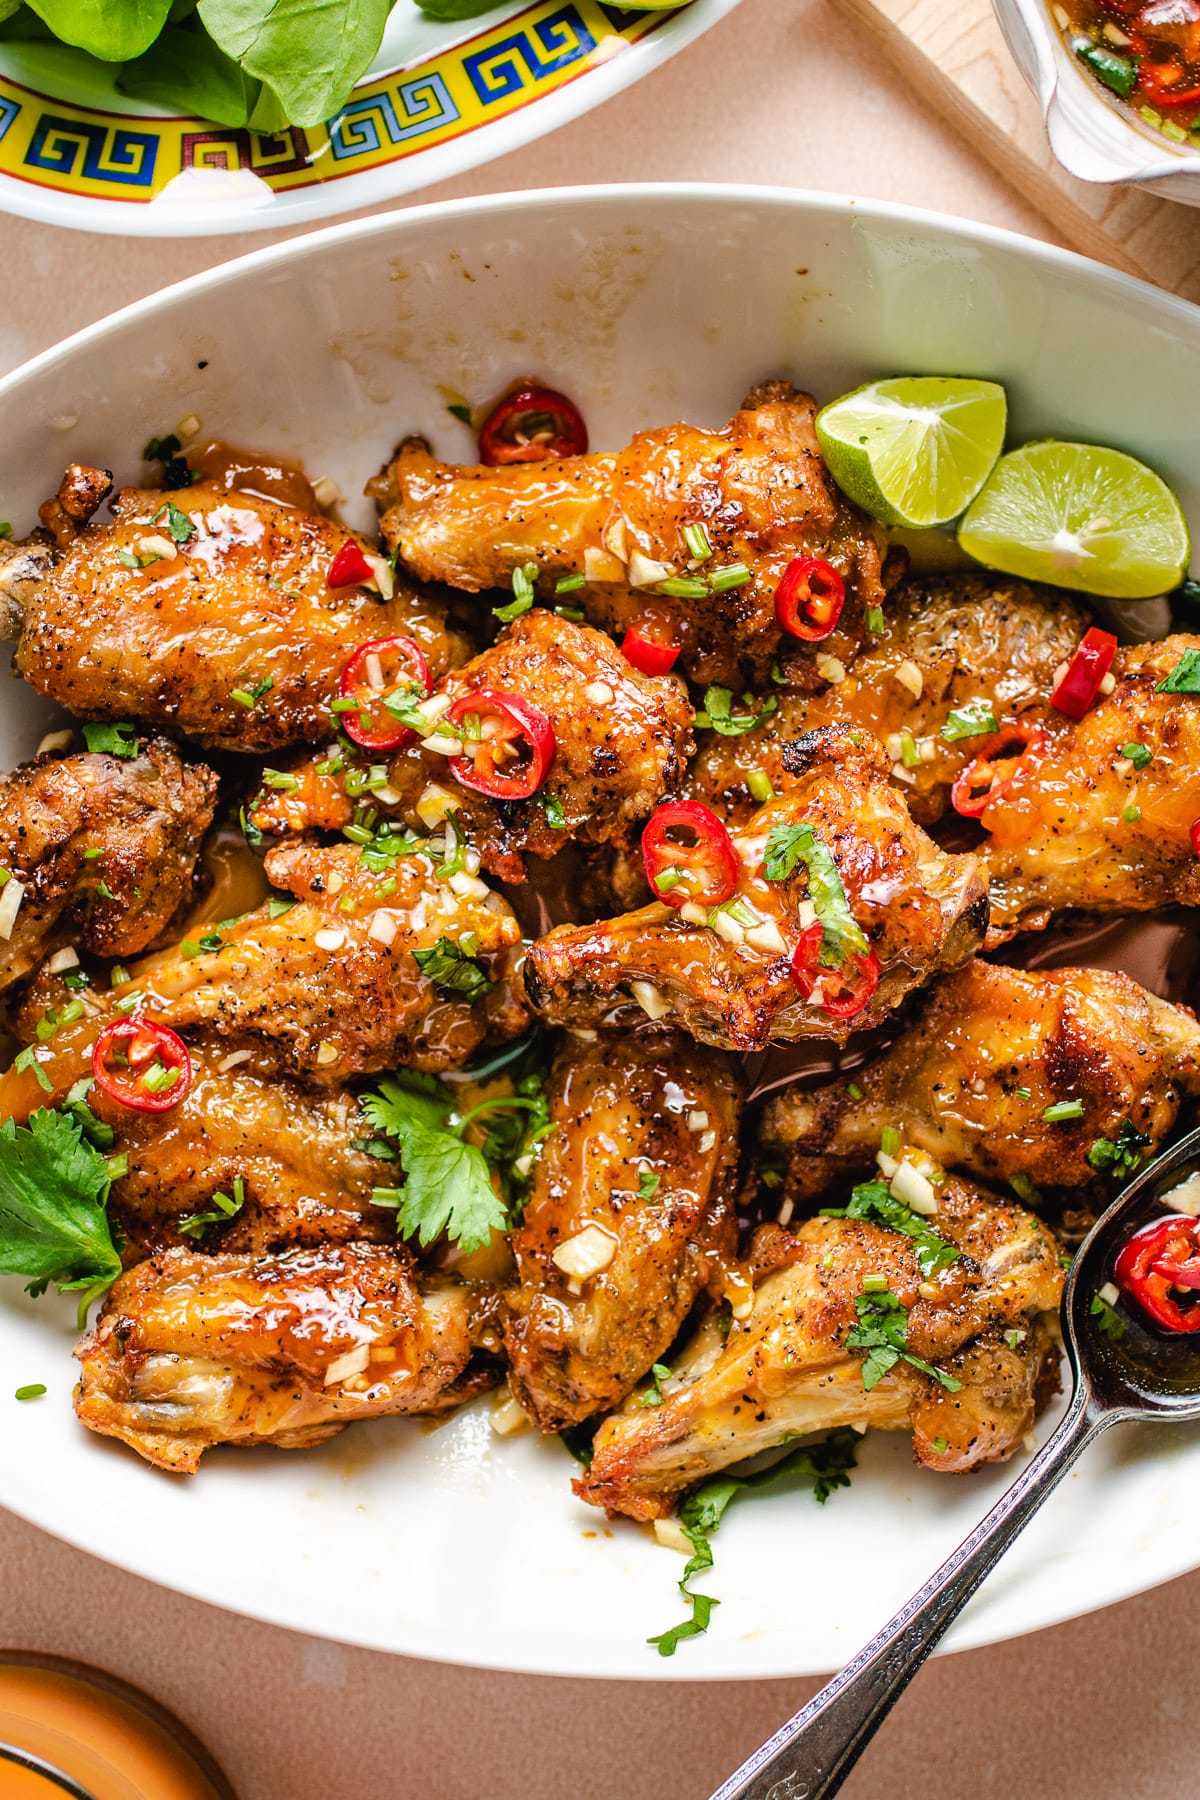 Feature image shows fish sauce wings air fried to crispy and tossed with Vietnamese sweet chili sauce served on a white plate.